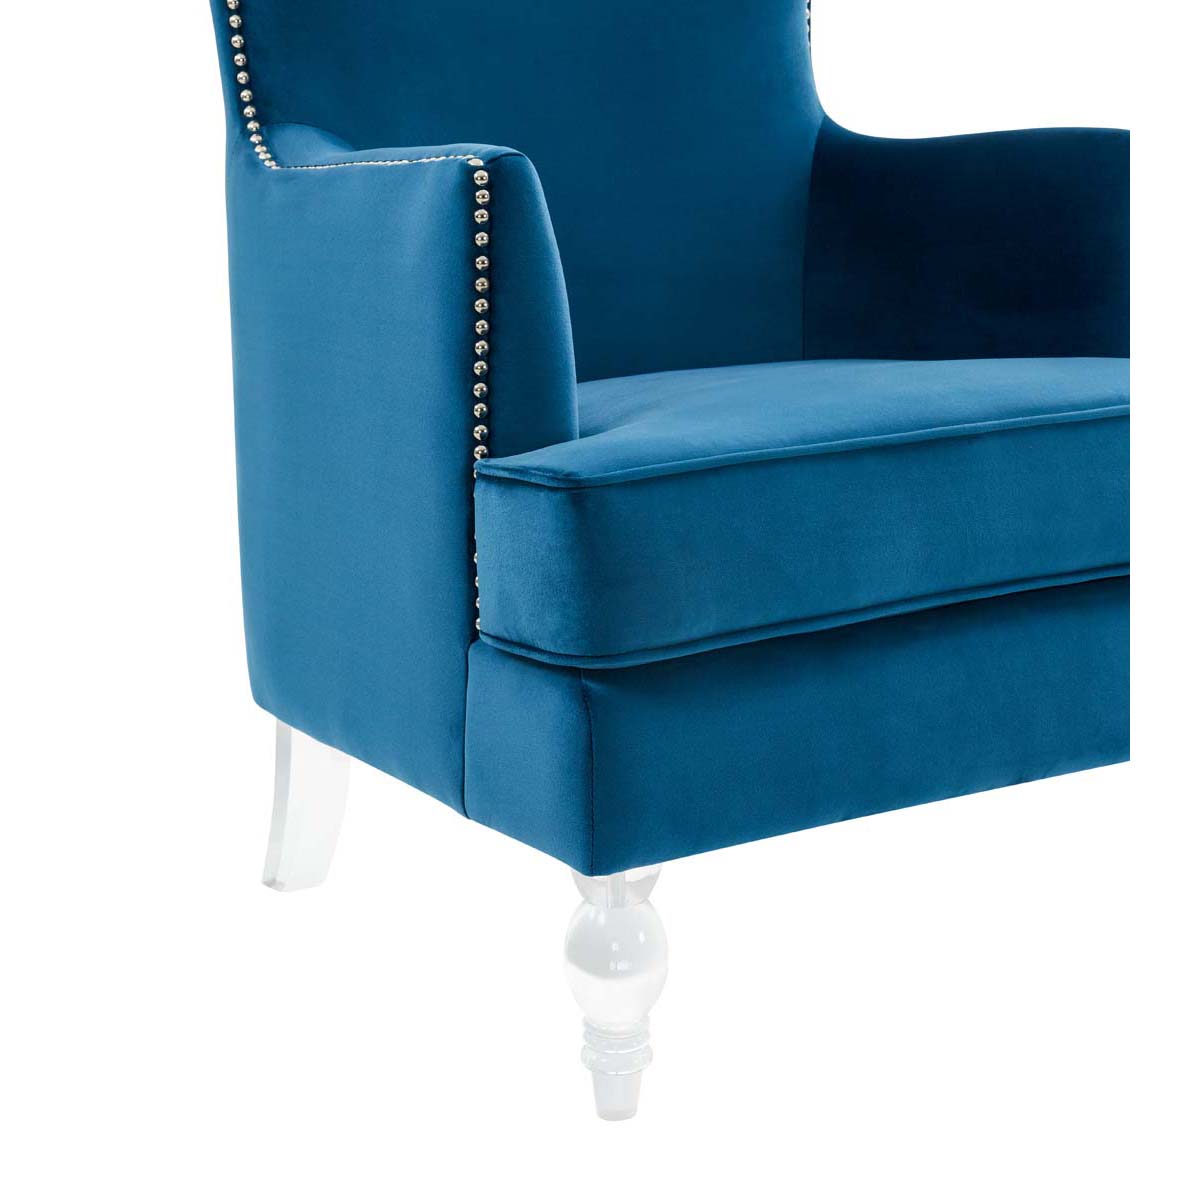 Safavieh Couture Geode Modern Wingback Chair - Navy